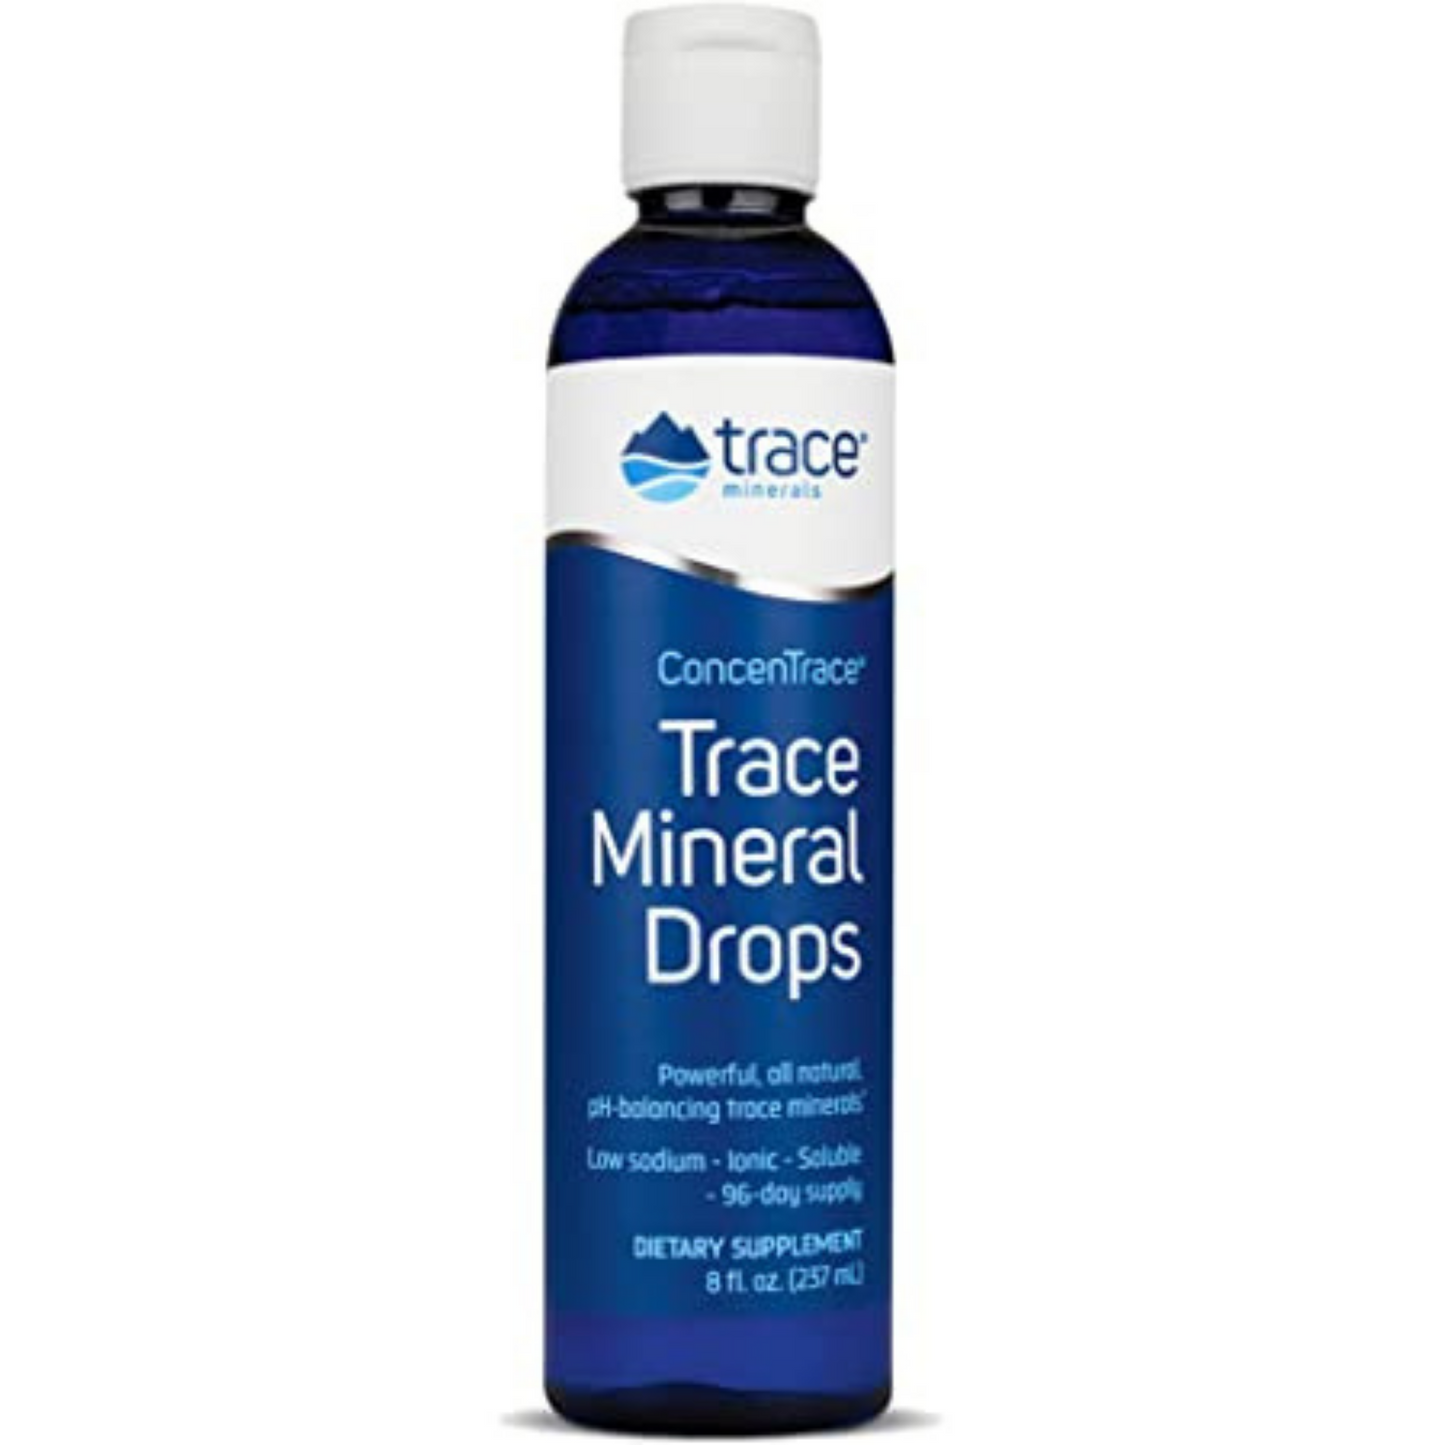 Primary Image of ConcenTrace Trace Mineral Drops